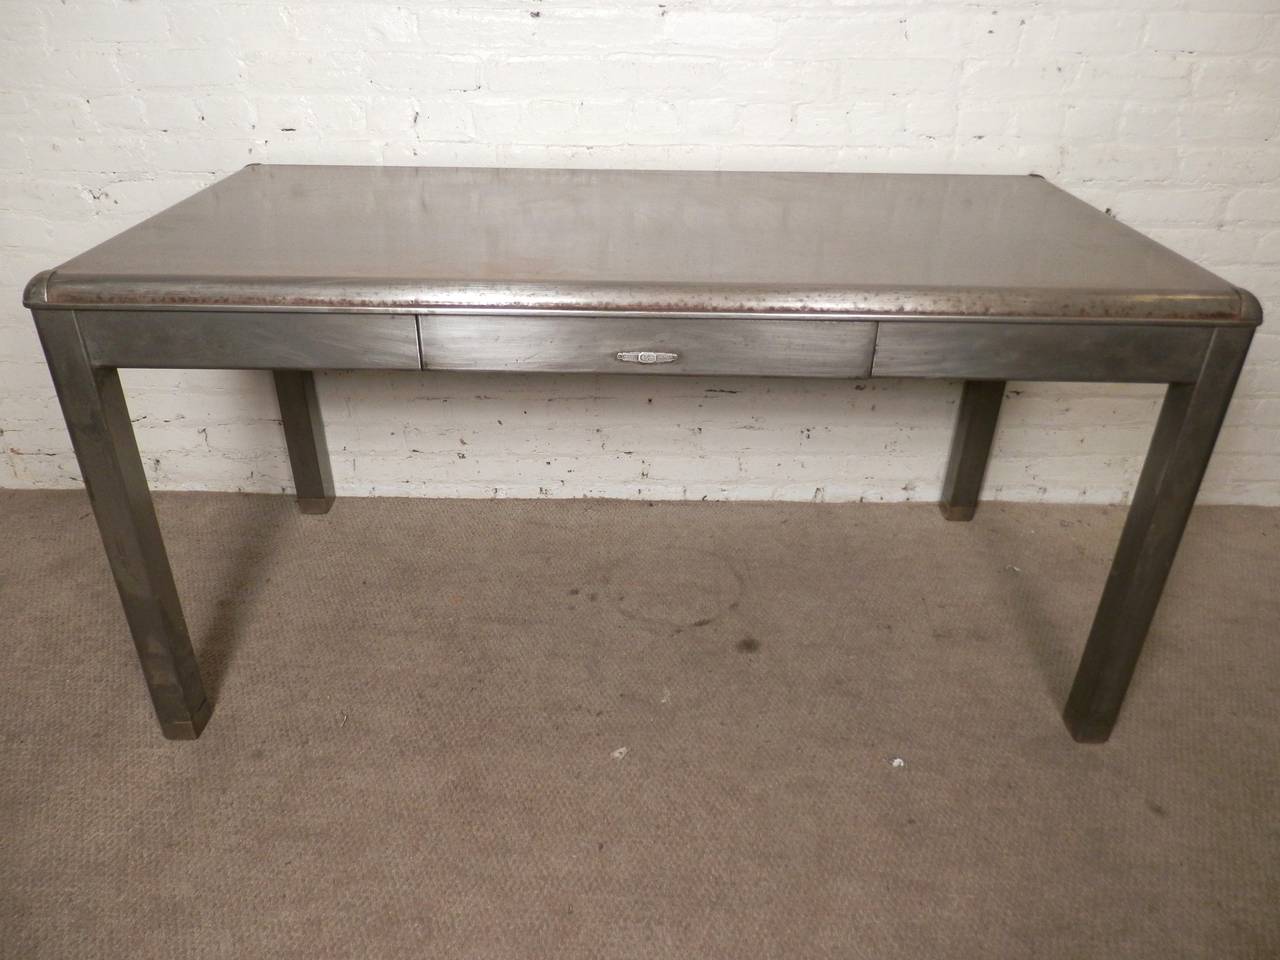 Attractive over-sized metal factory desk made by Yawman & Erbe Mfg Co. (